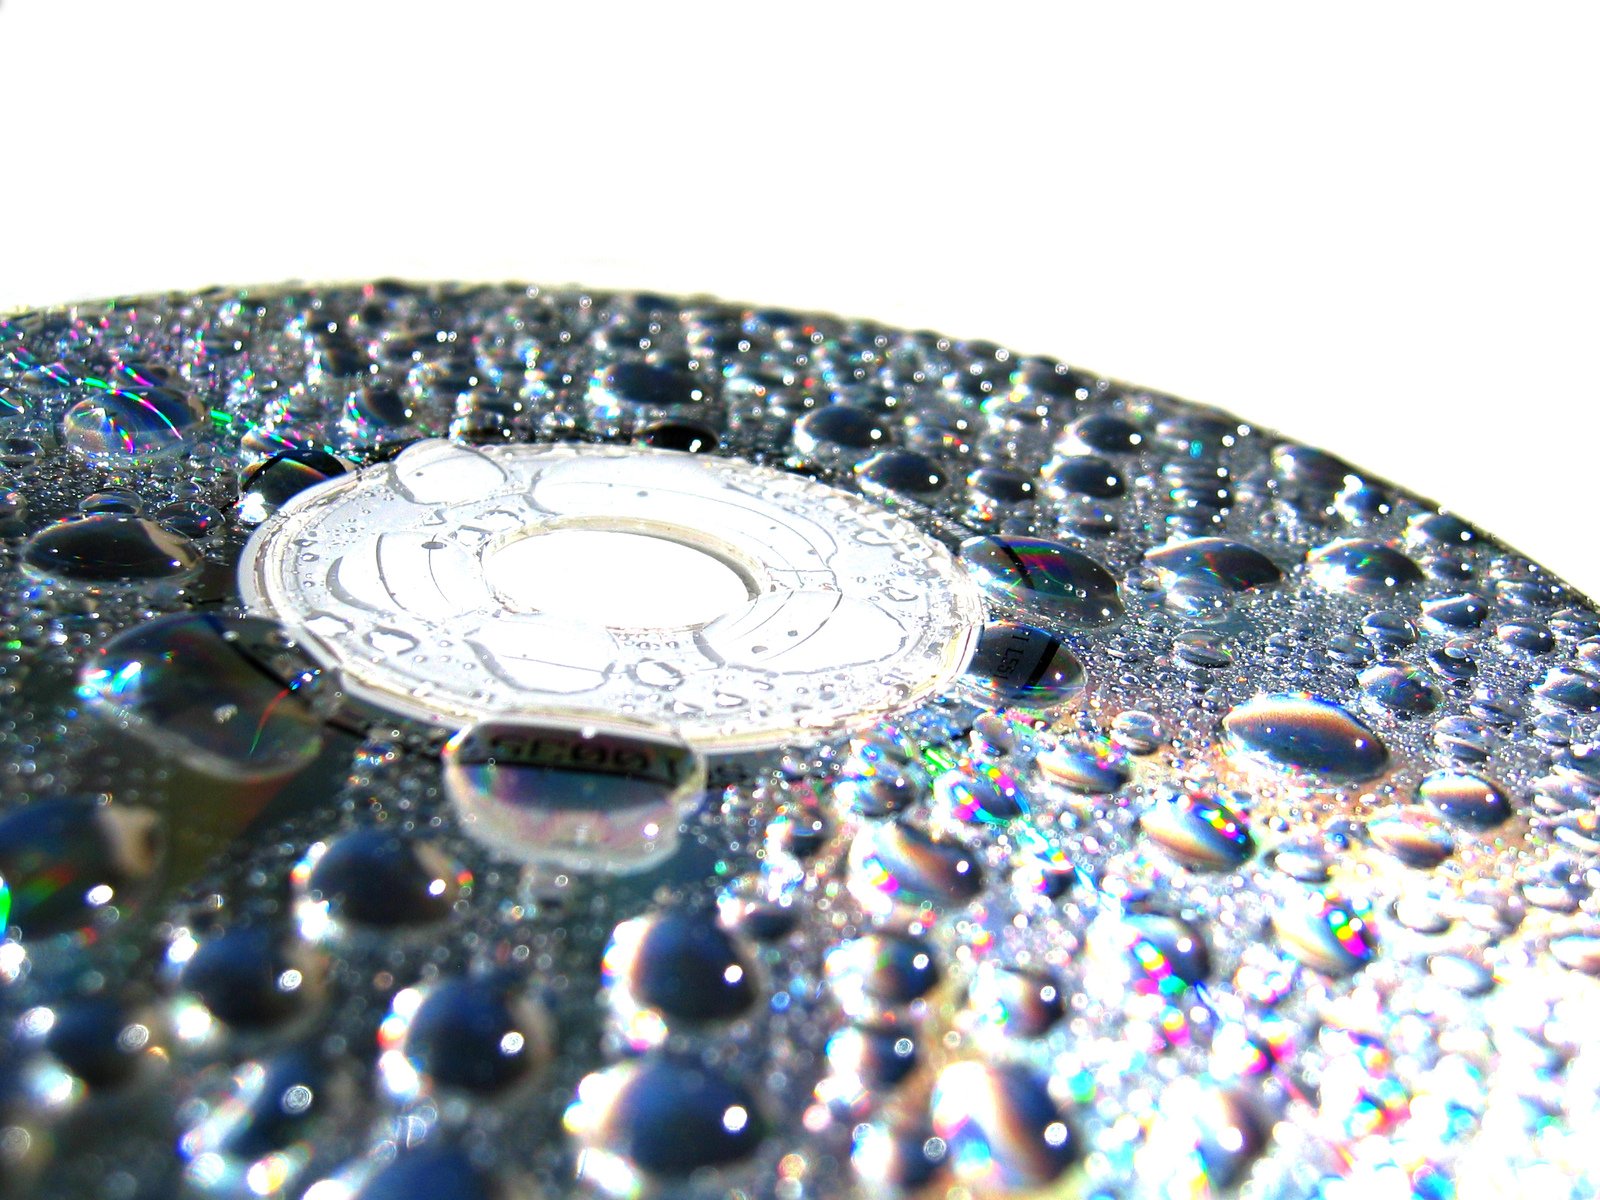 the disc is reflecting water droplets on it